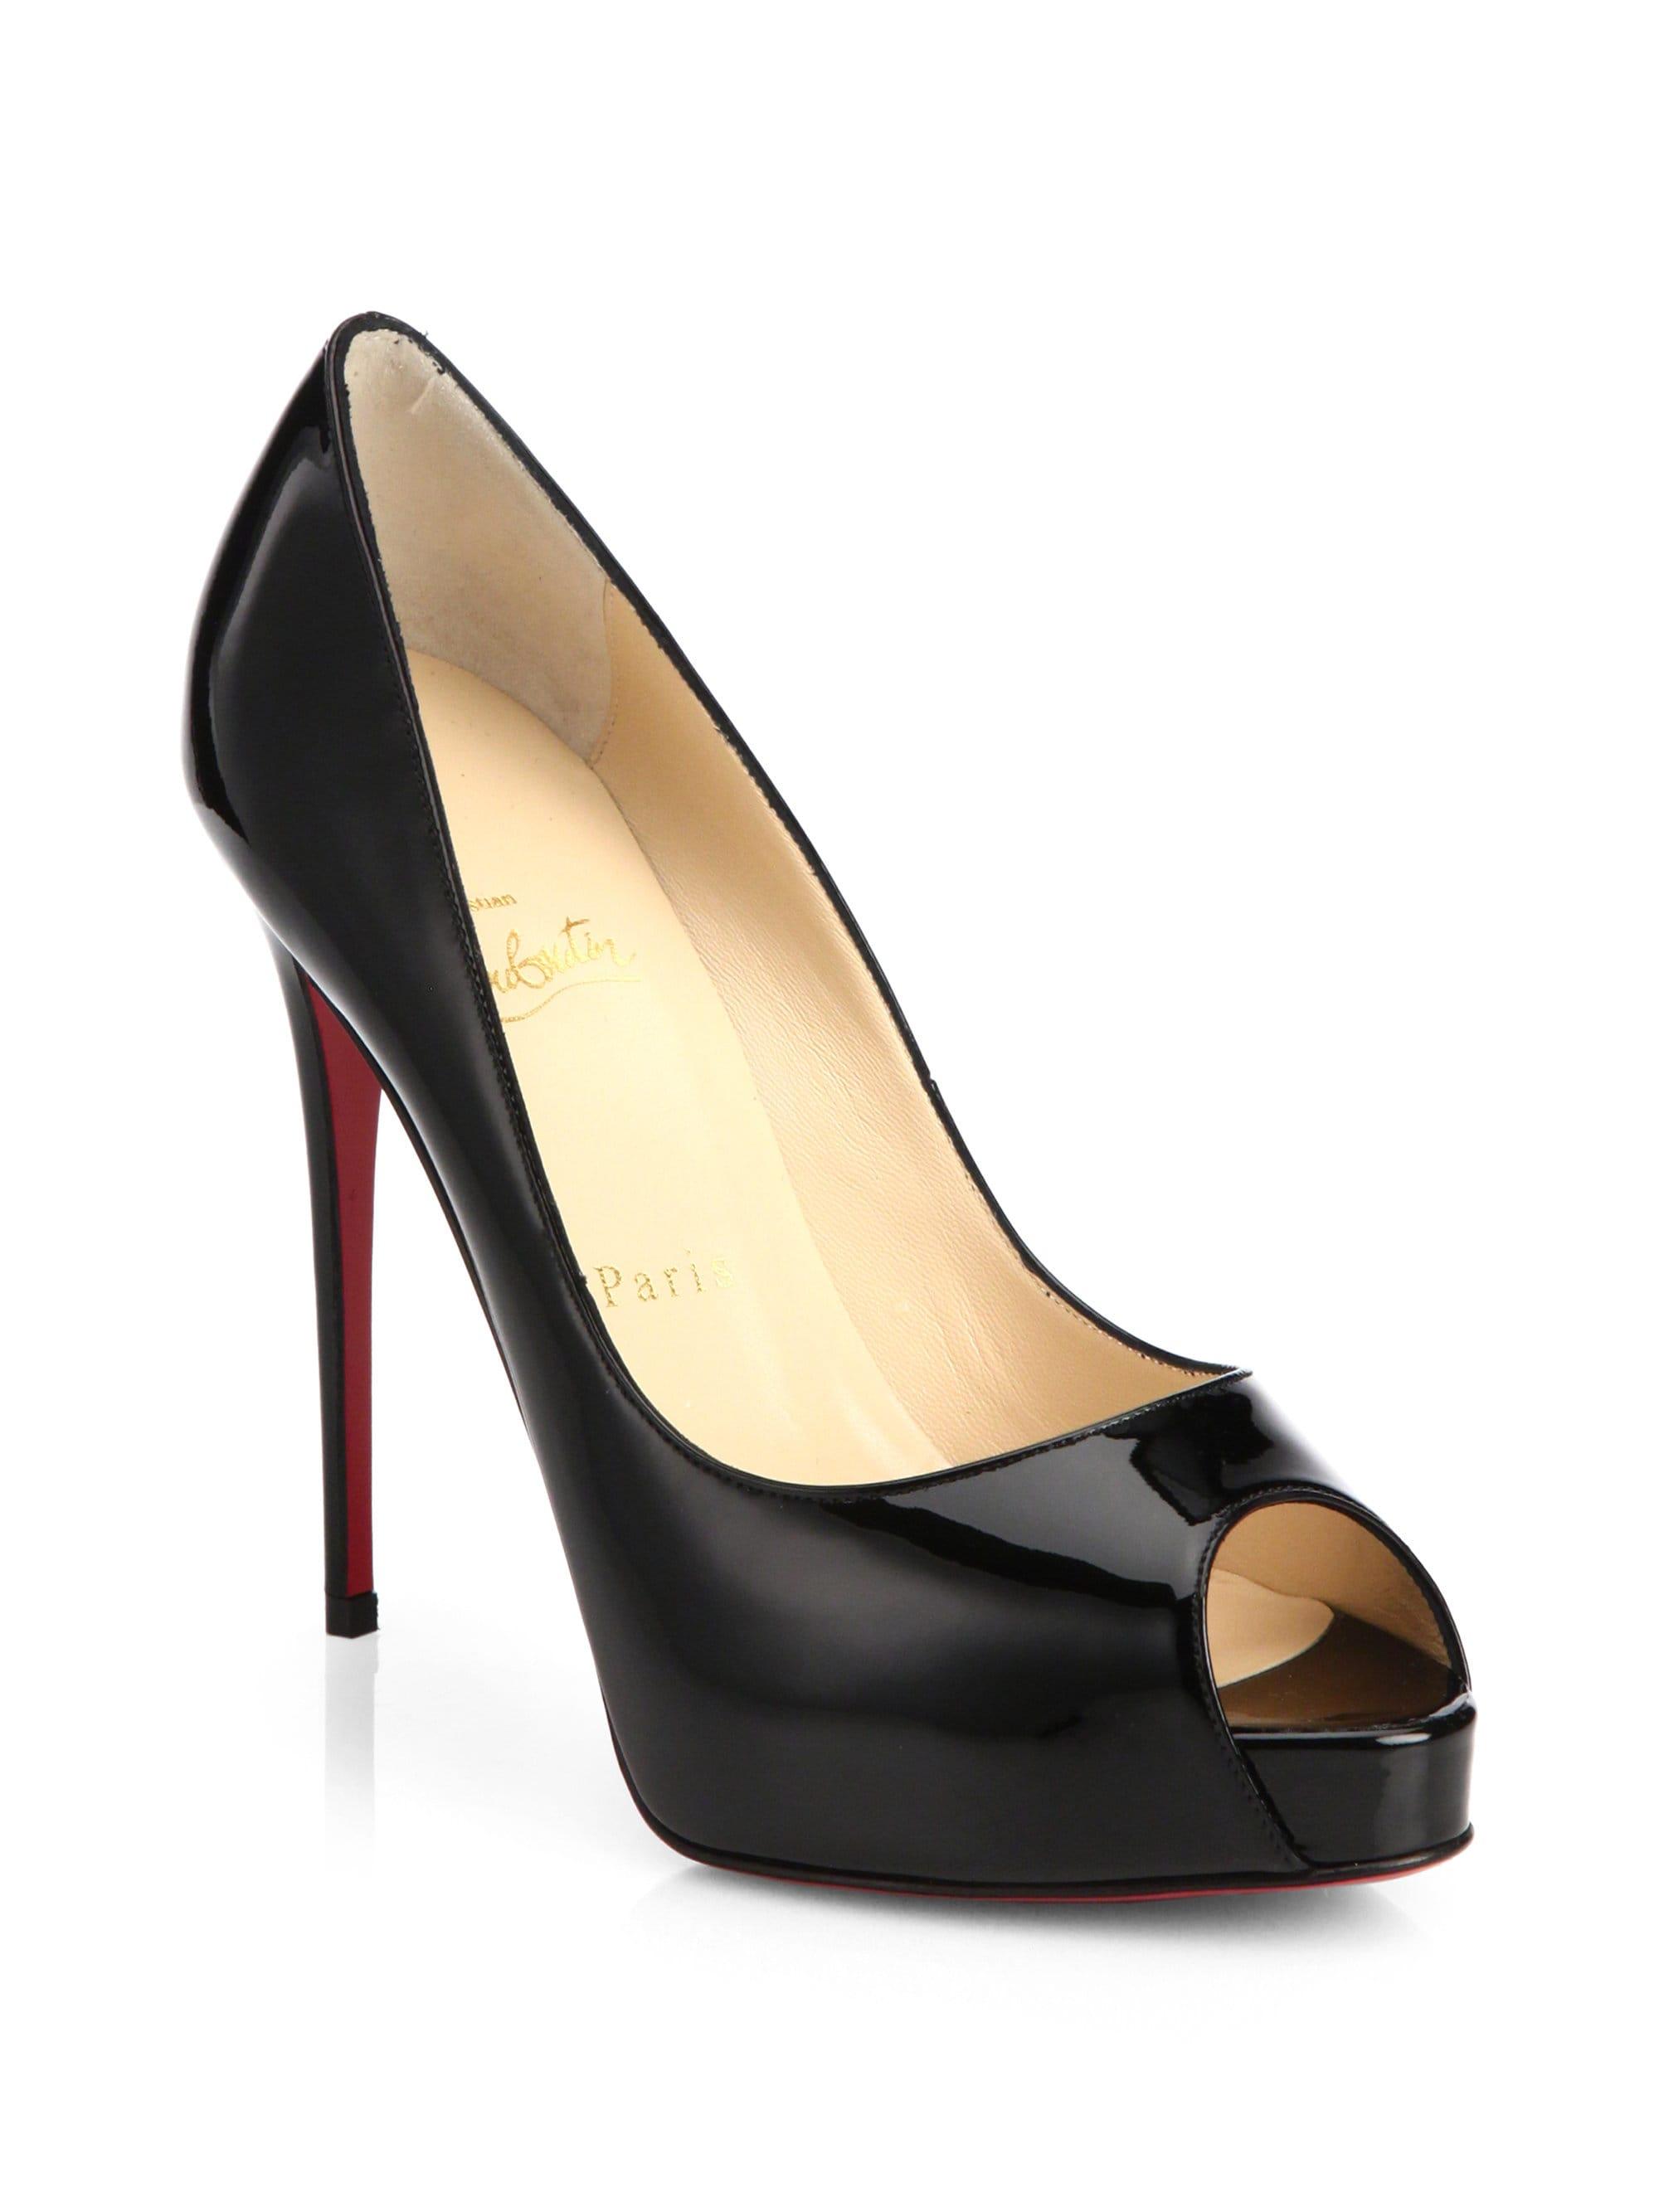 Lyst - Christian Louboutin New Very Prive 120 Patent Leather Peep Toe ...